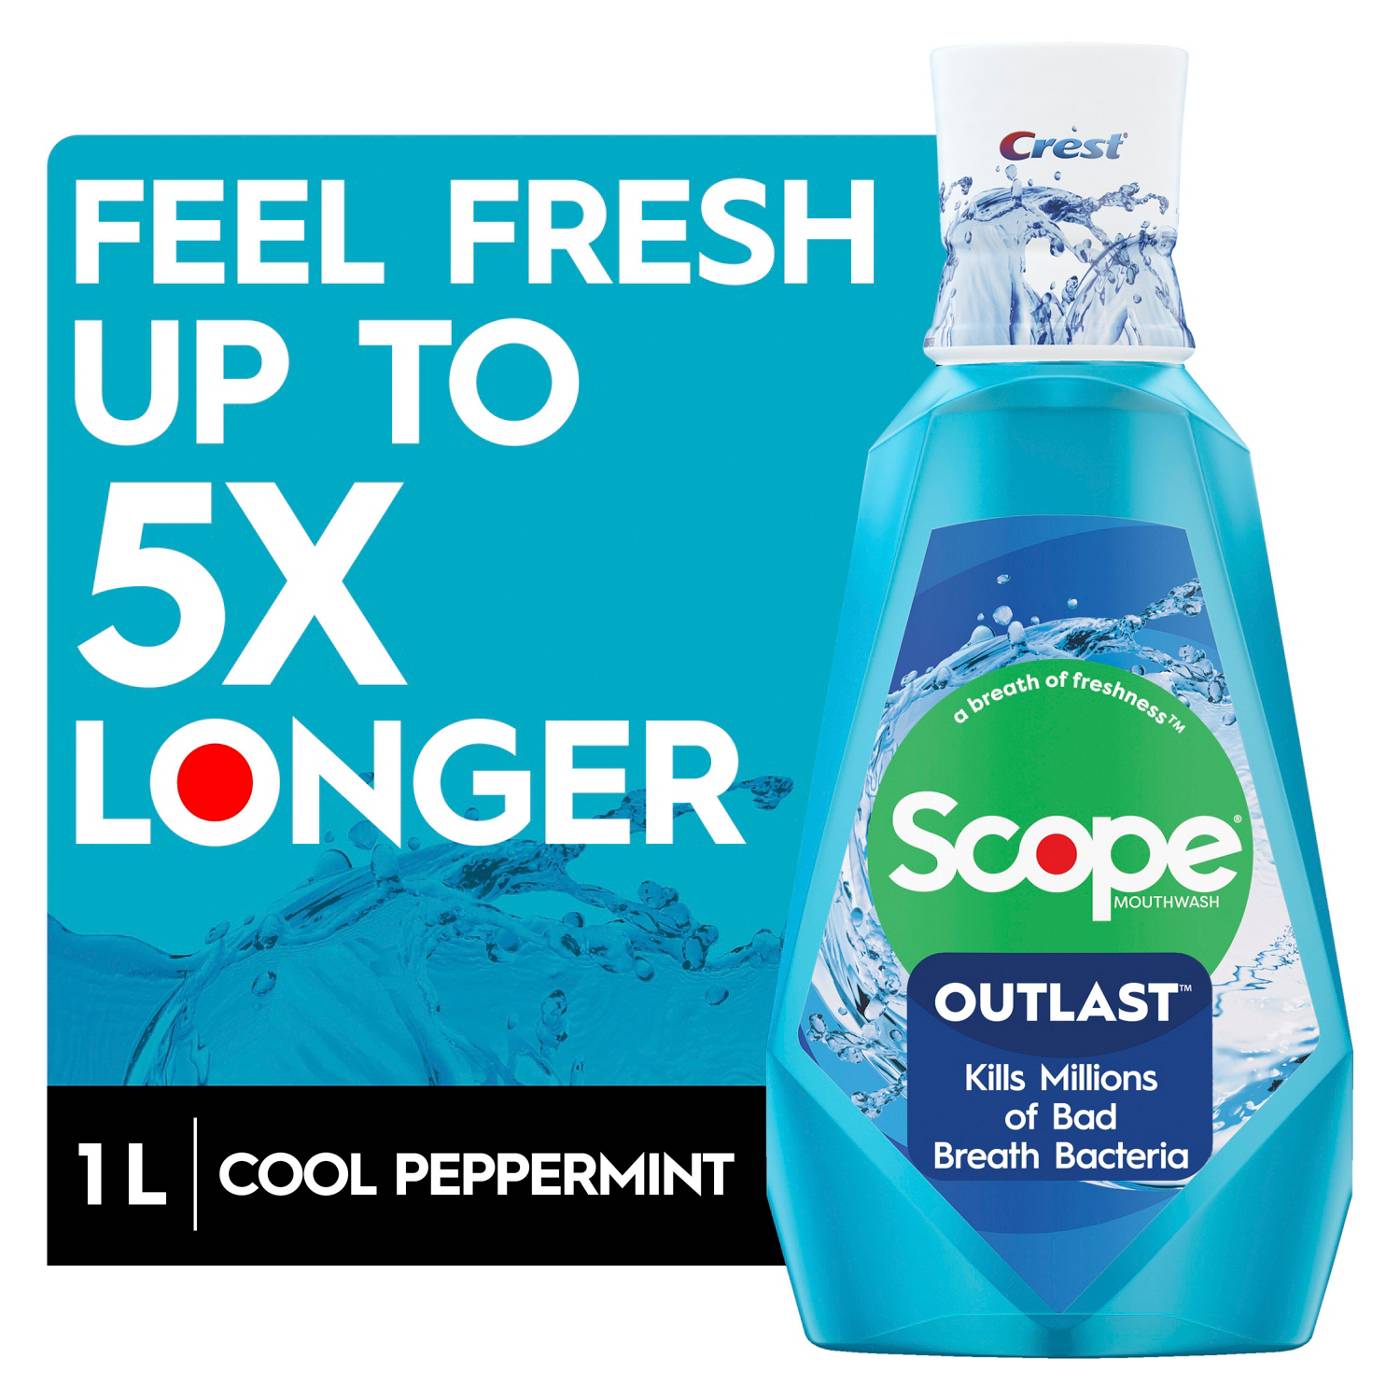 Crest Scope Outlast Mouthwash - Cool Peppermint; image 8 of 9